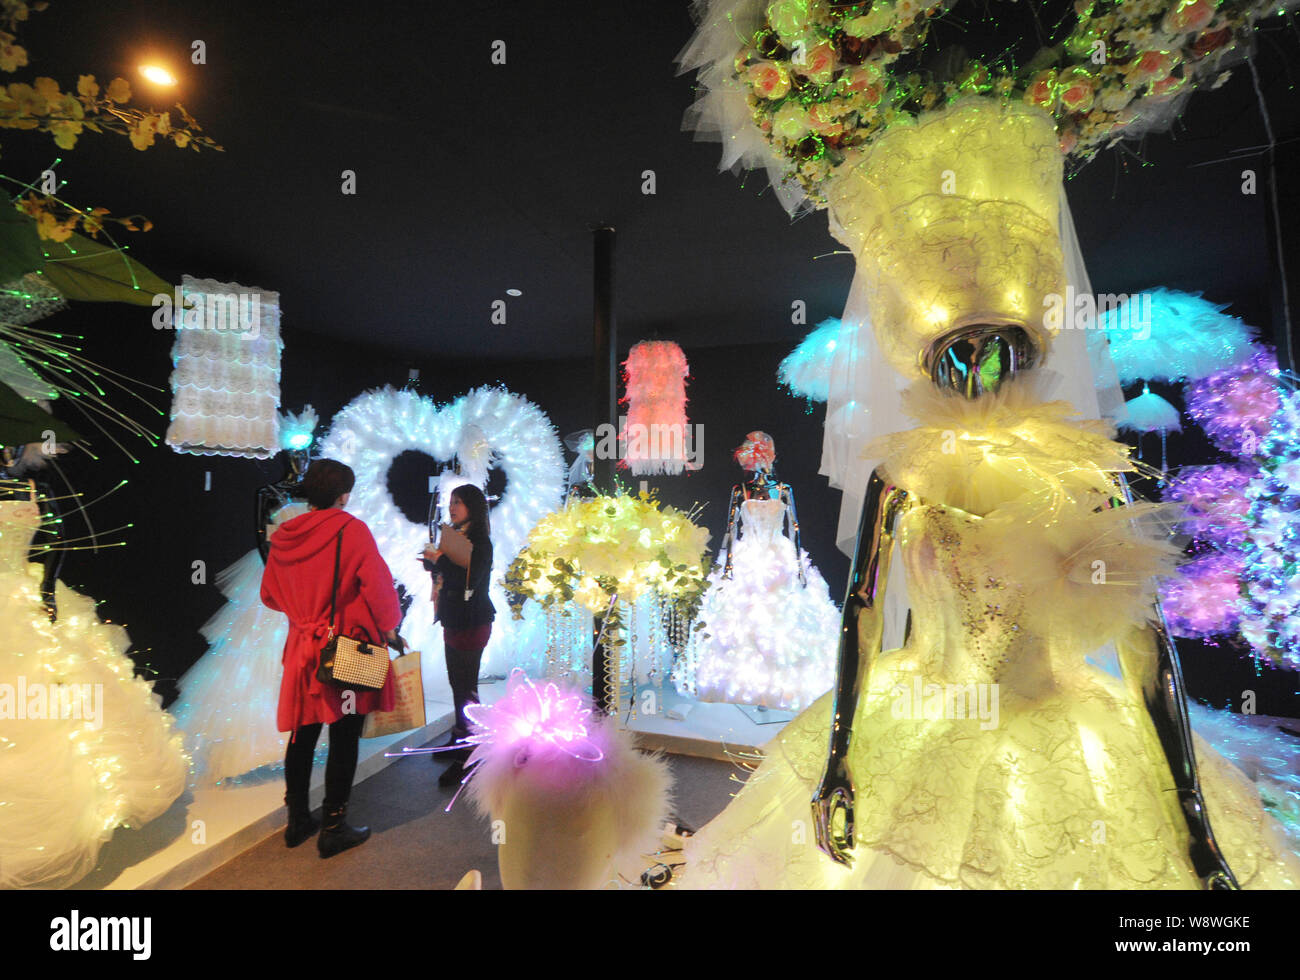 A Chinese employee talks with a visitor next to illuminated fibre optic wedding dresses on display at the China Wedding Expo 2014 in Shanghai, China, Stock Photo